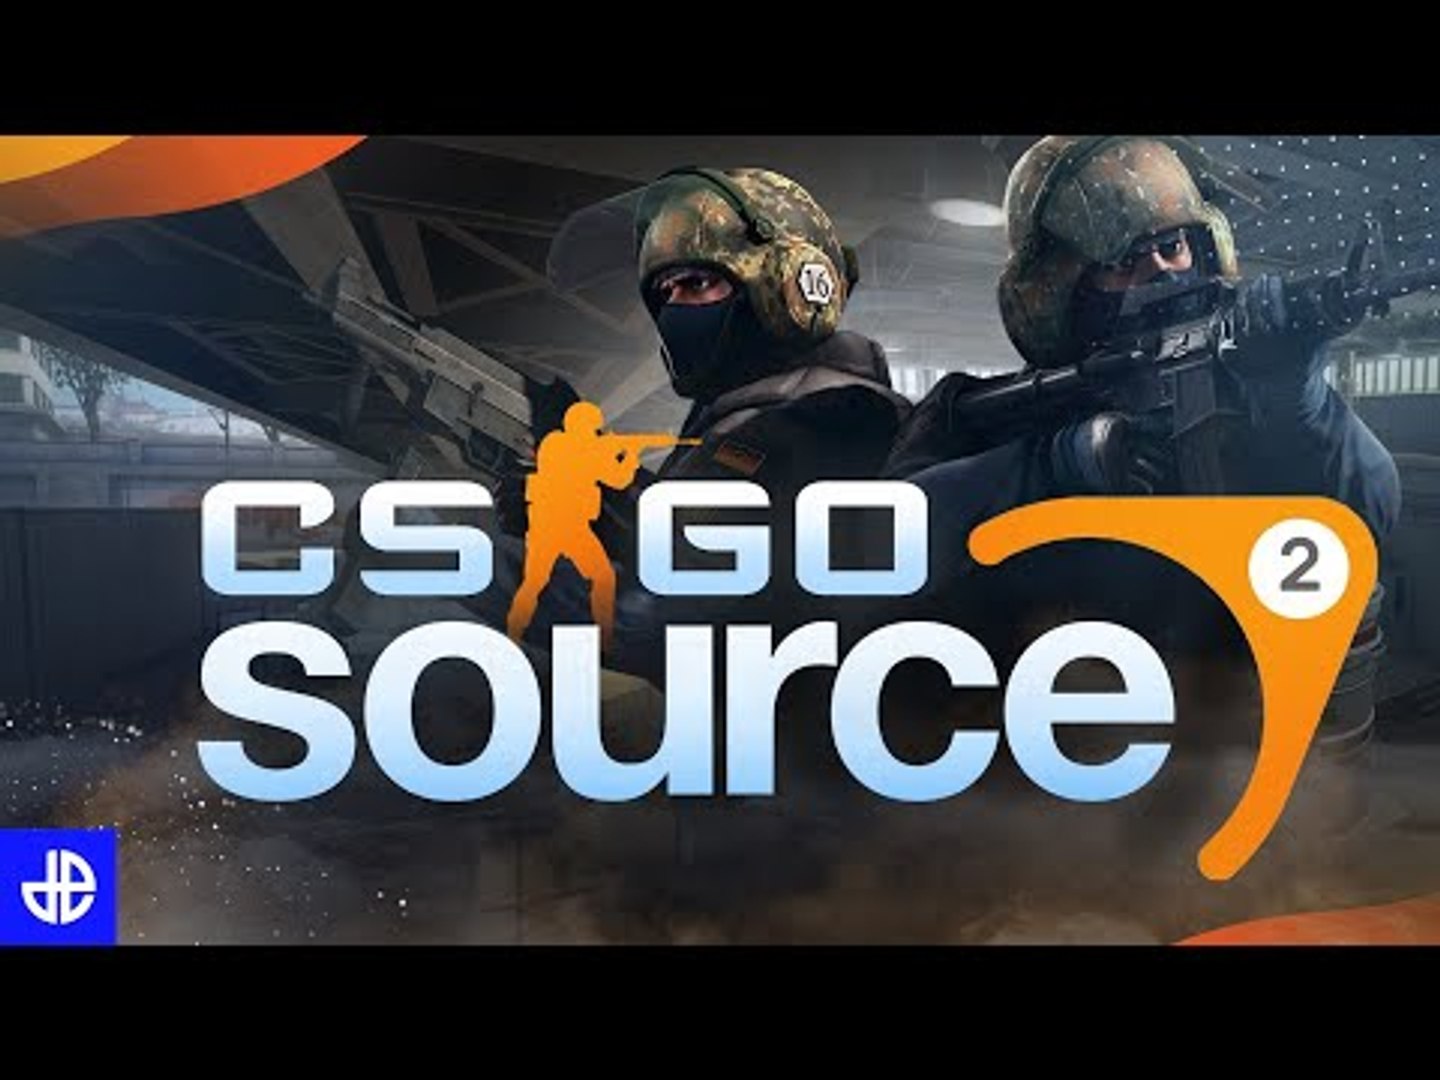 All You Need To Know About CSGO Source 2